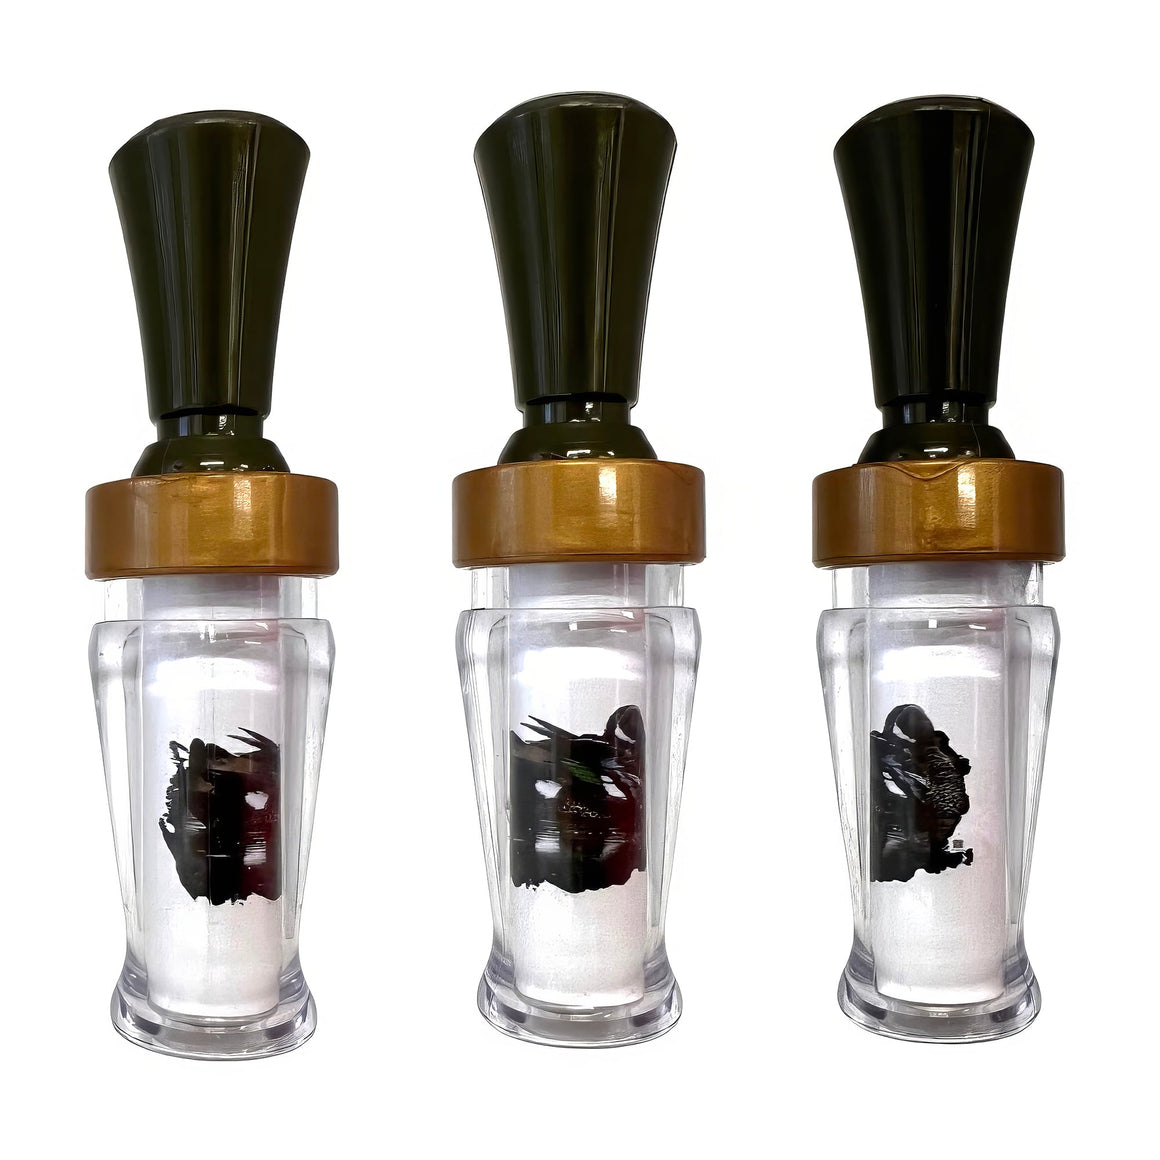 KENNETH LAIRD STUDIOS BLUE WING POLYCARBONATE IMAGE DUCK CALL